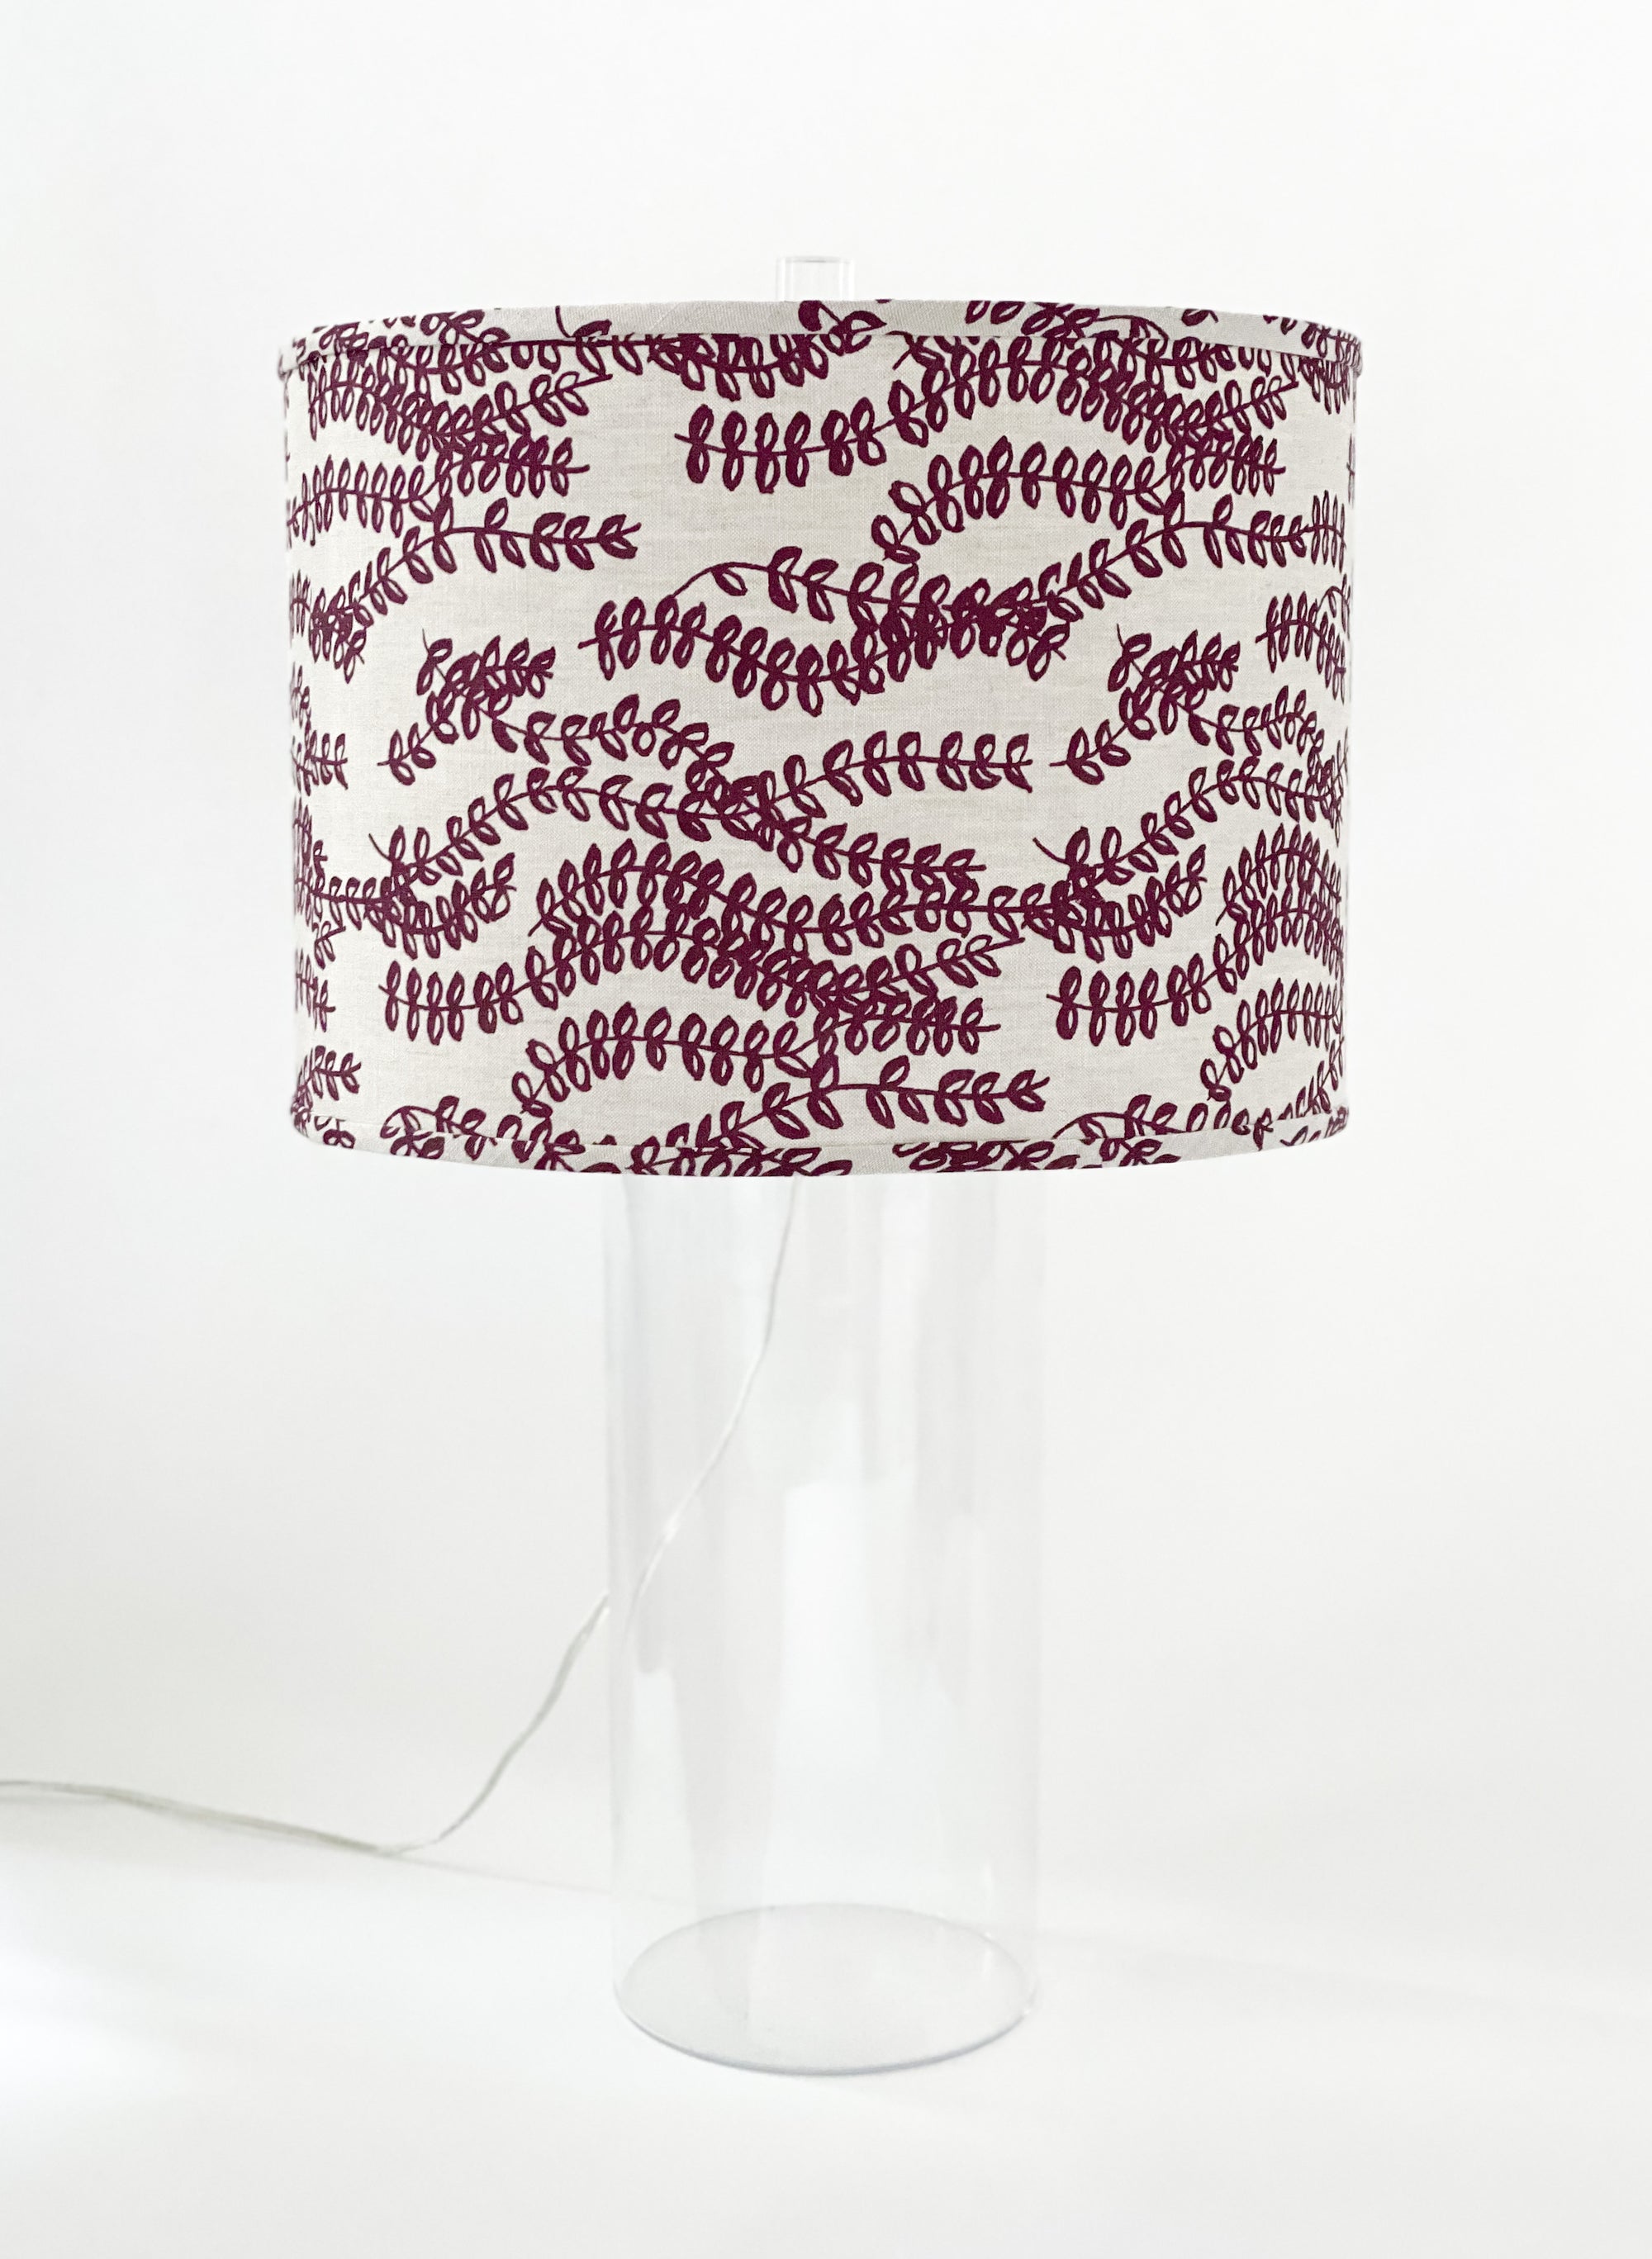 Made to order Lampshades